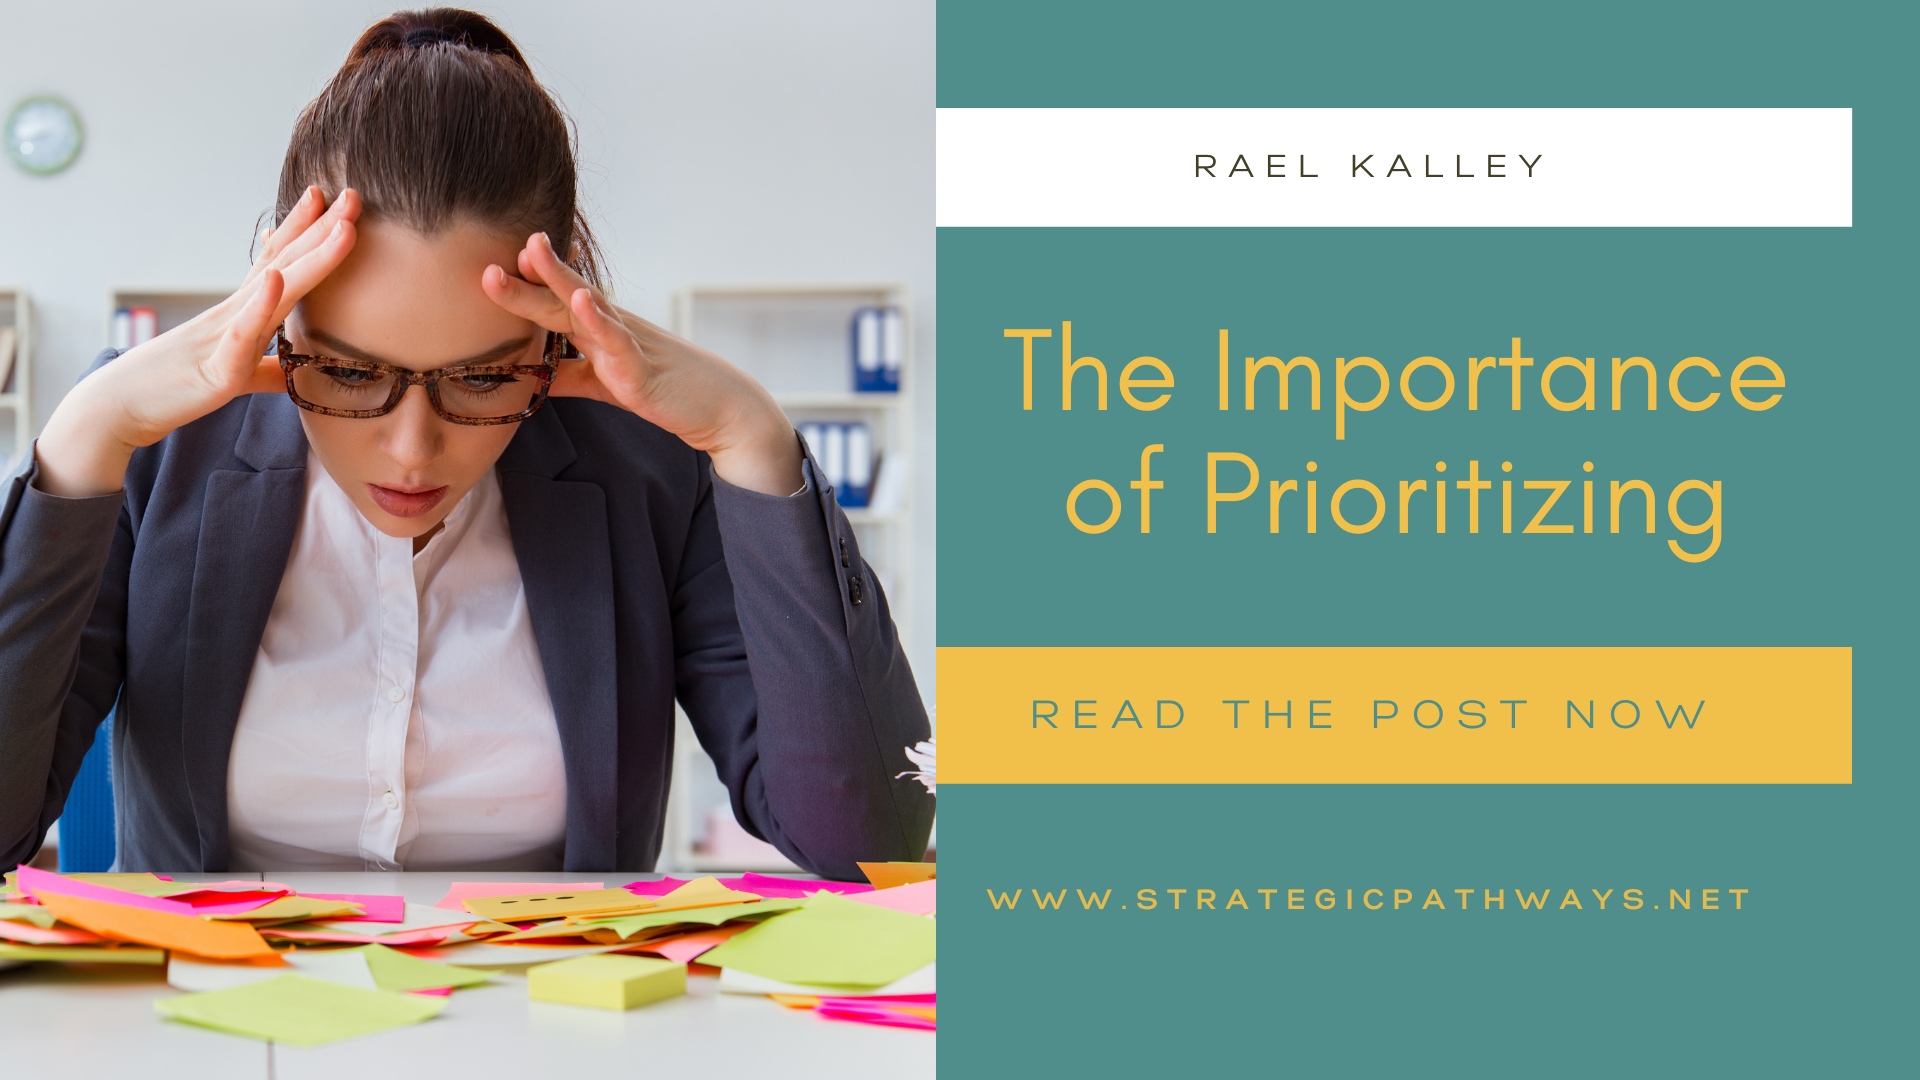 Text says "The Importance of Prioritizing" and image is a woman in her office